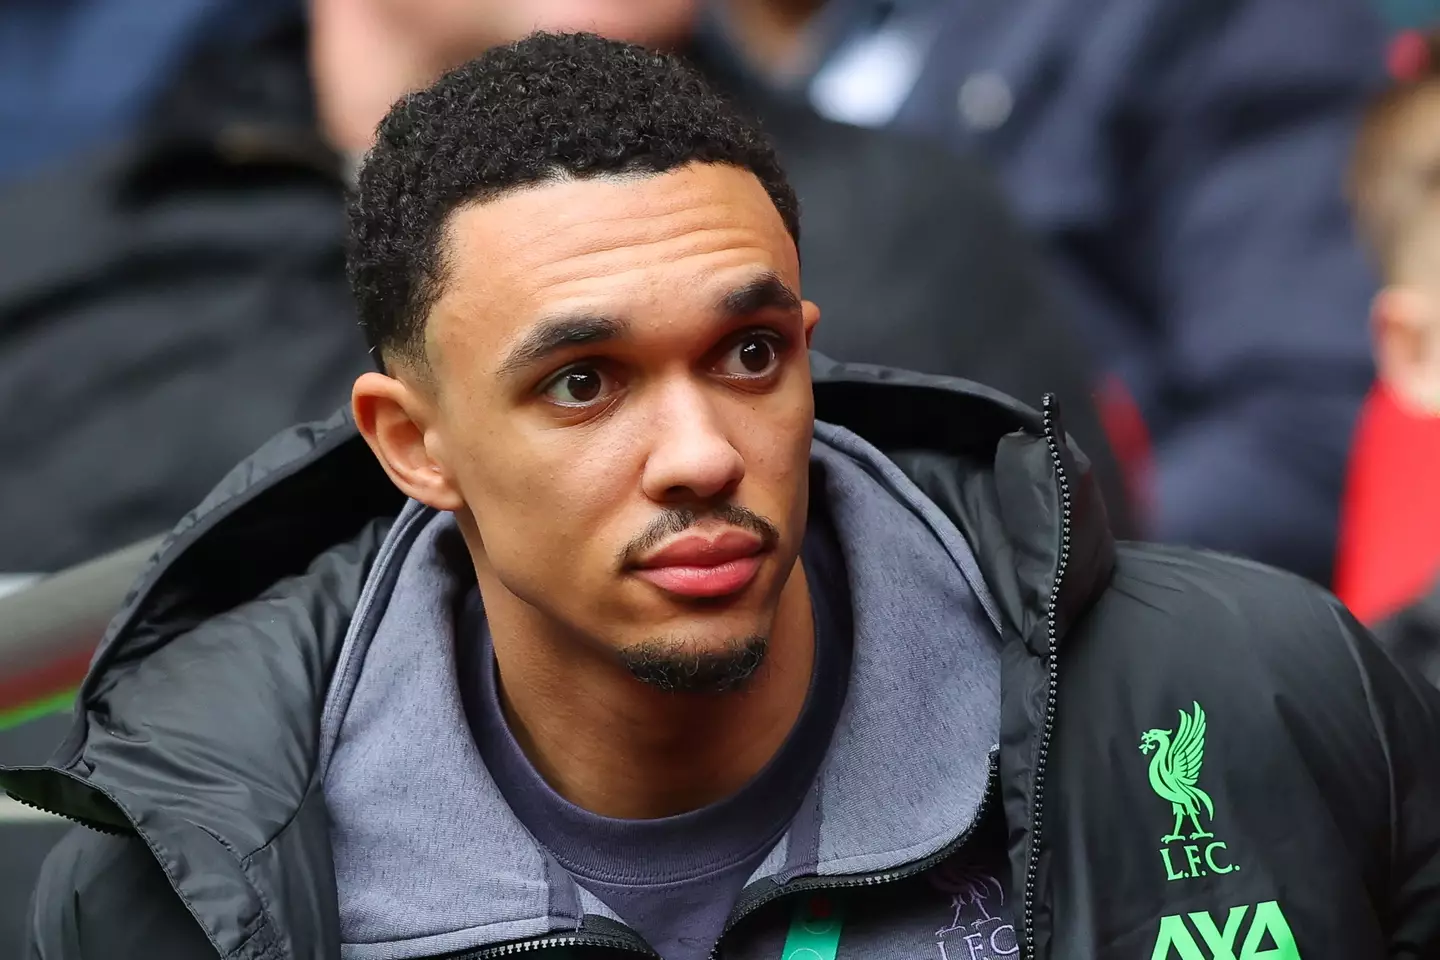 Alexander-Arnold has been linked with a move to Real (Getty)